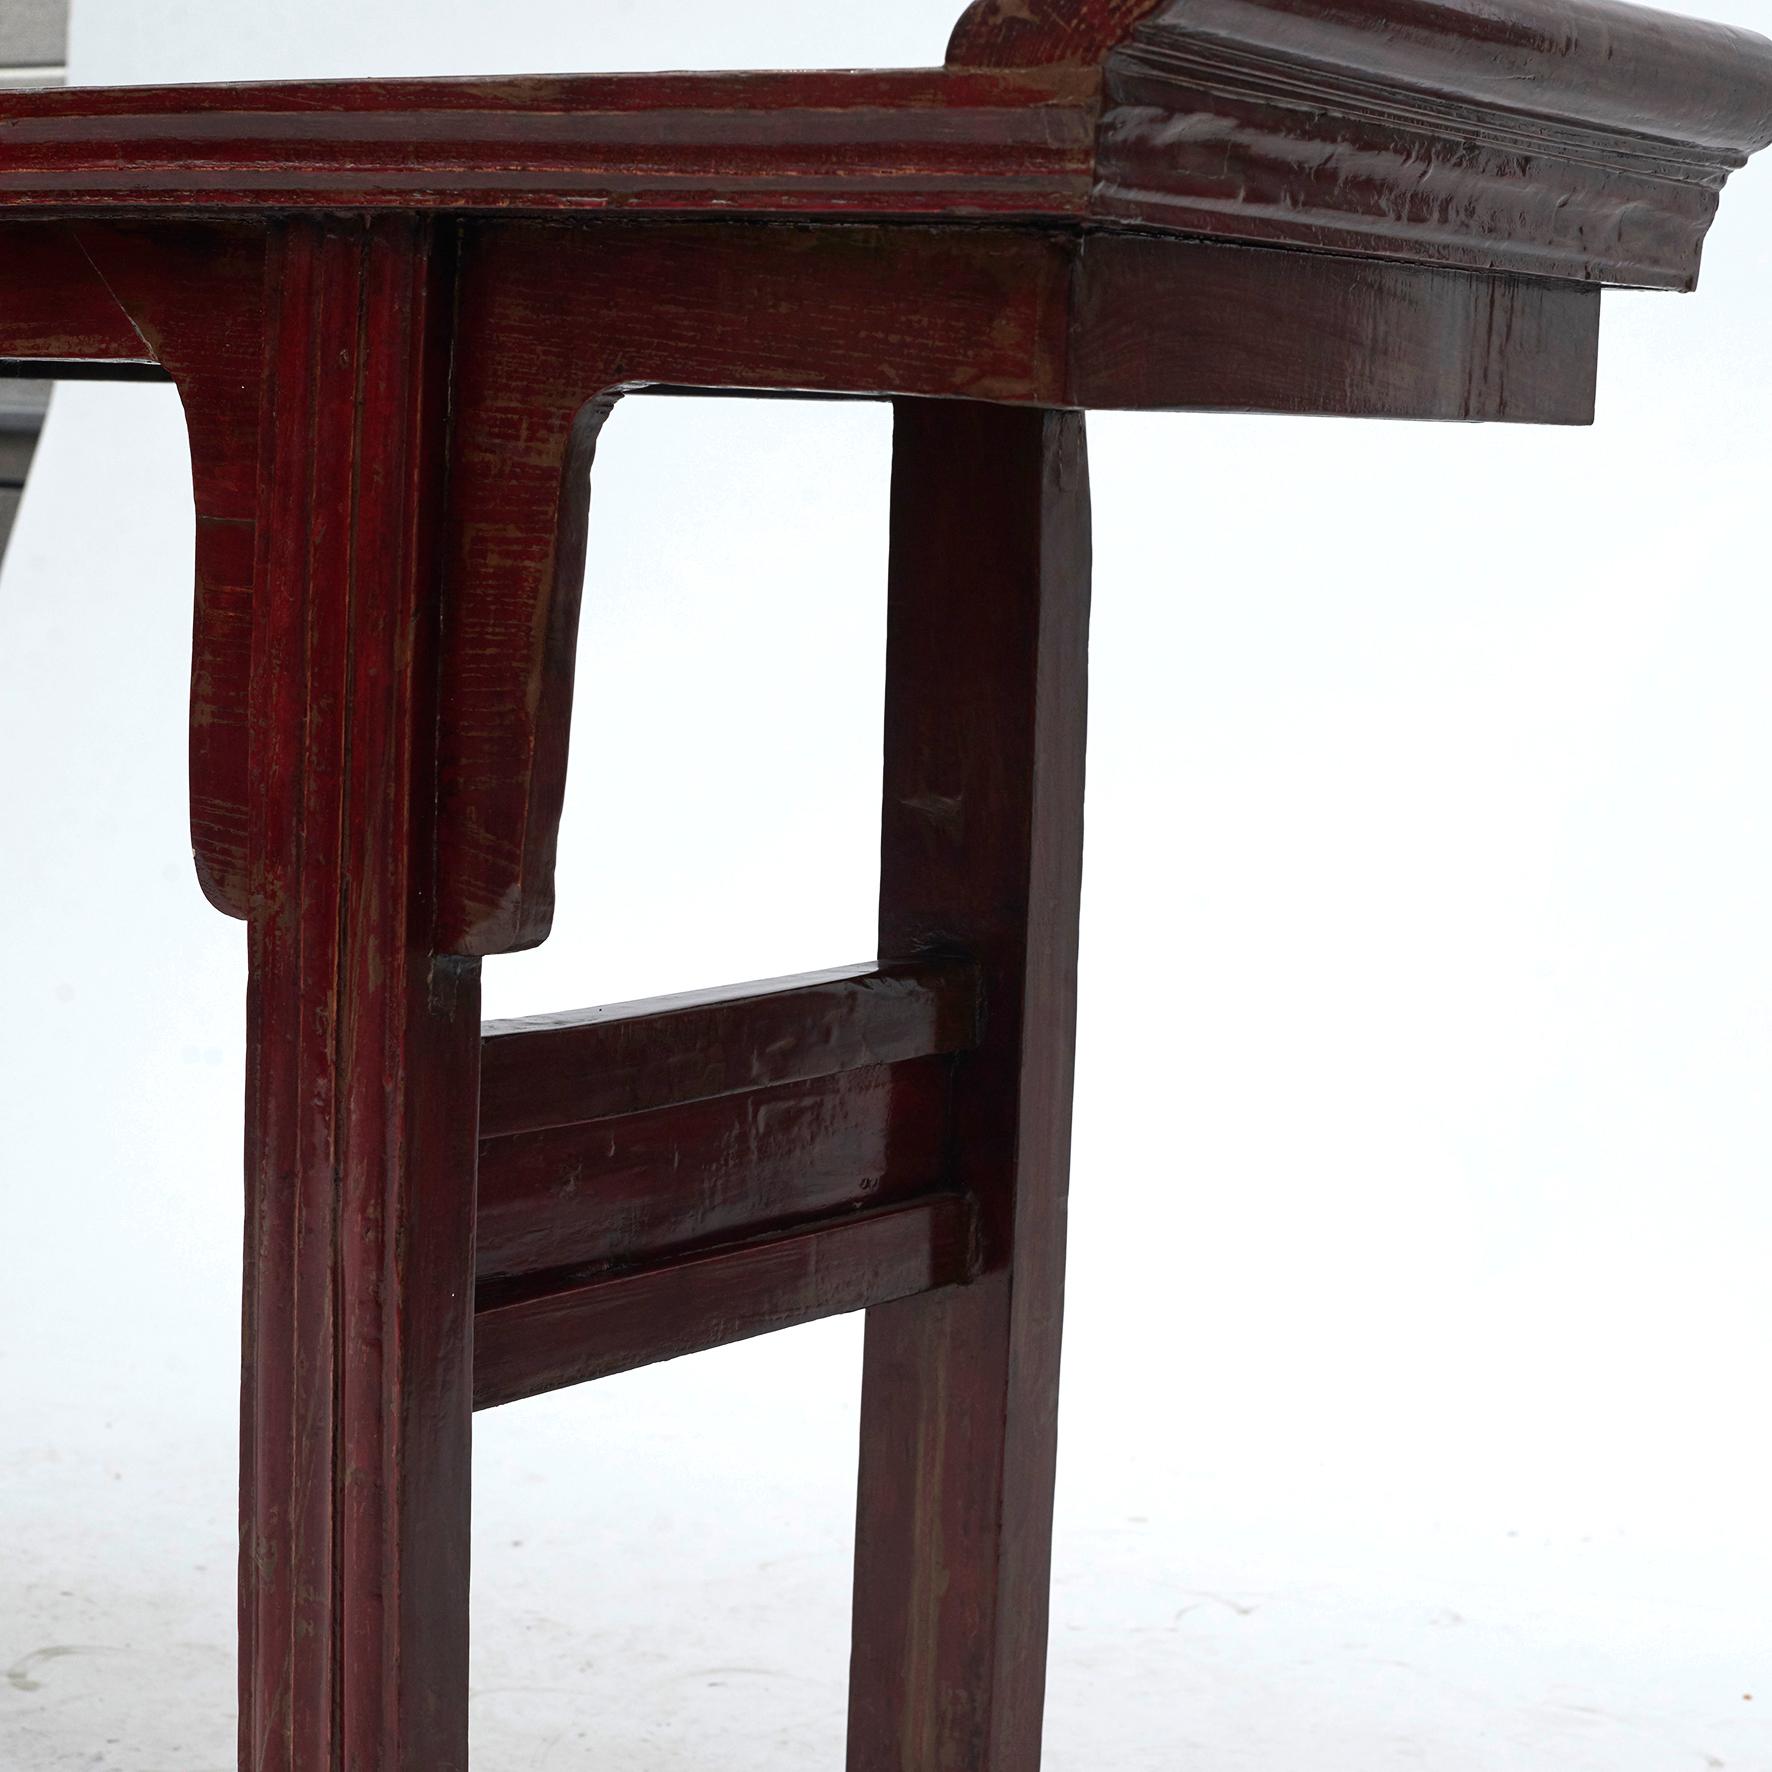 19th Century Red Lacquer Altar / Console Table